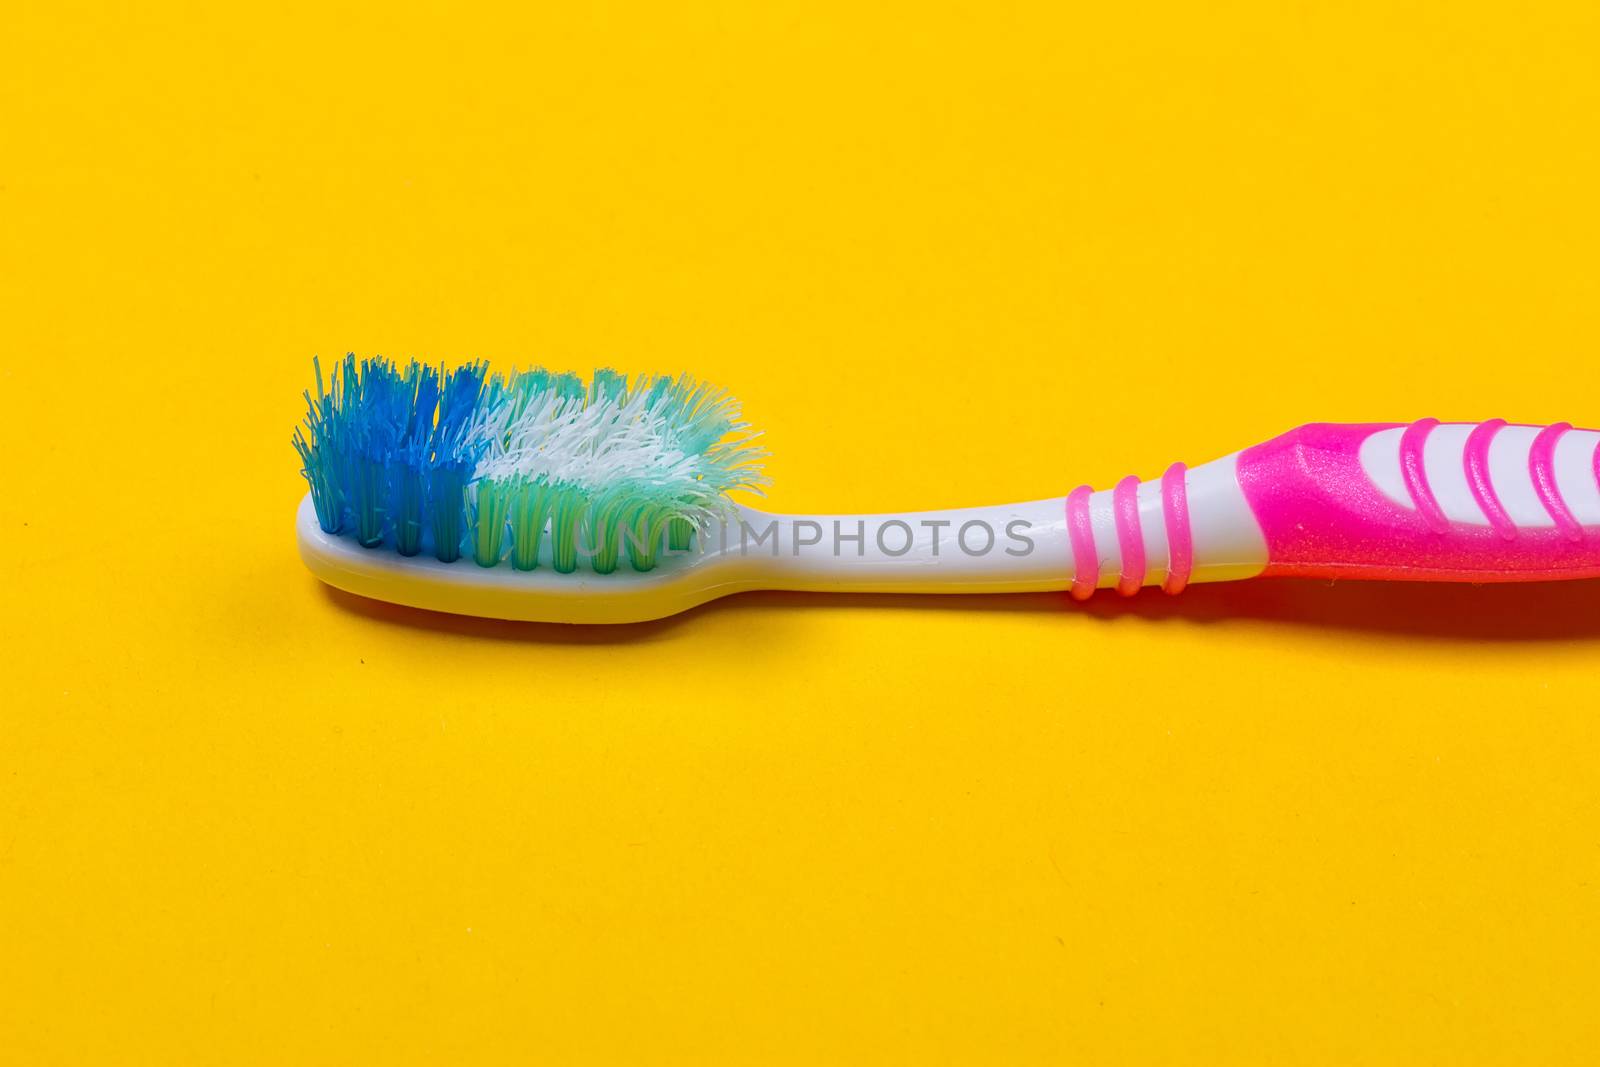 Old used toothbrush on the yellow background. Top view